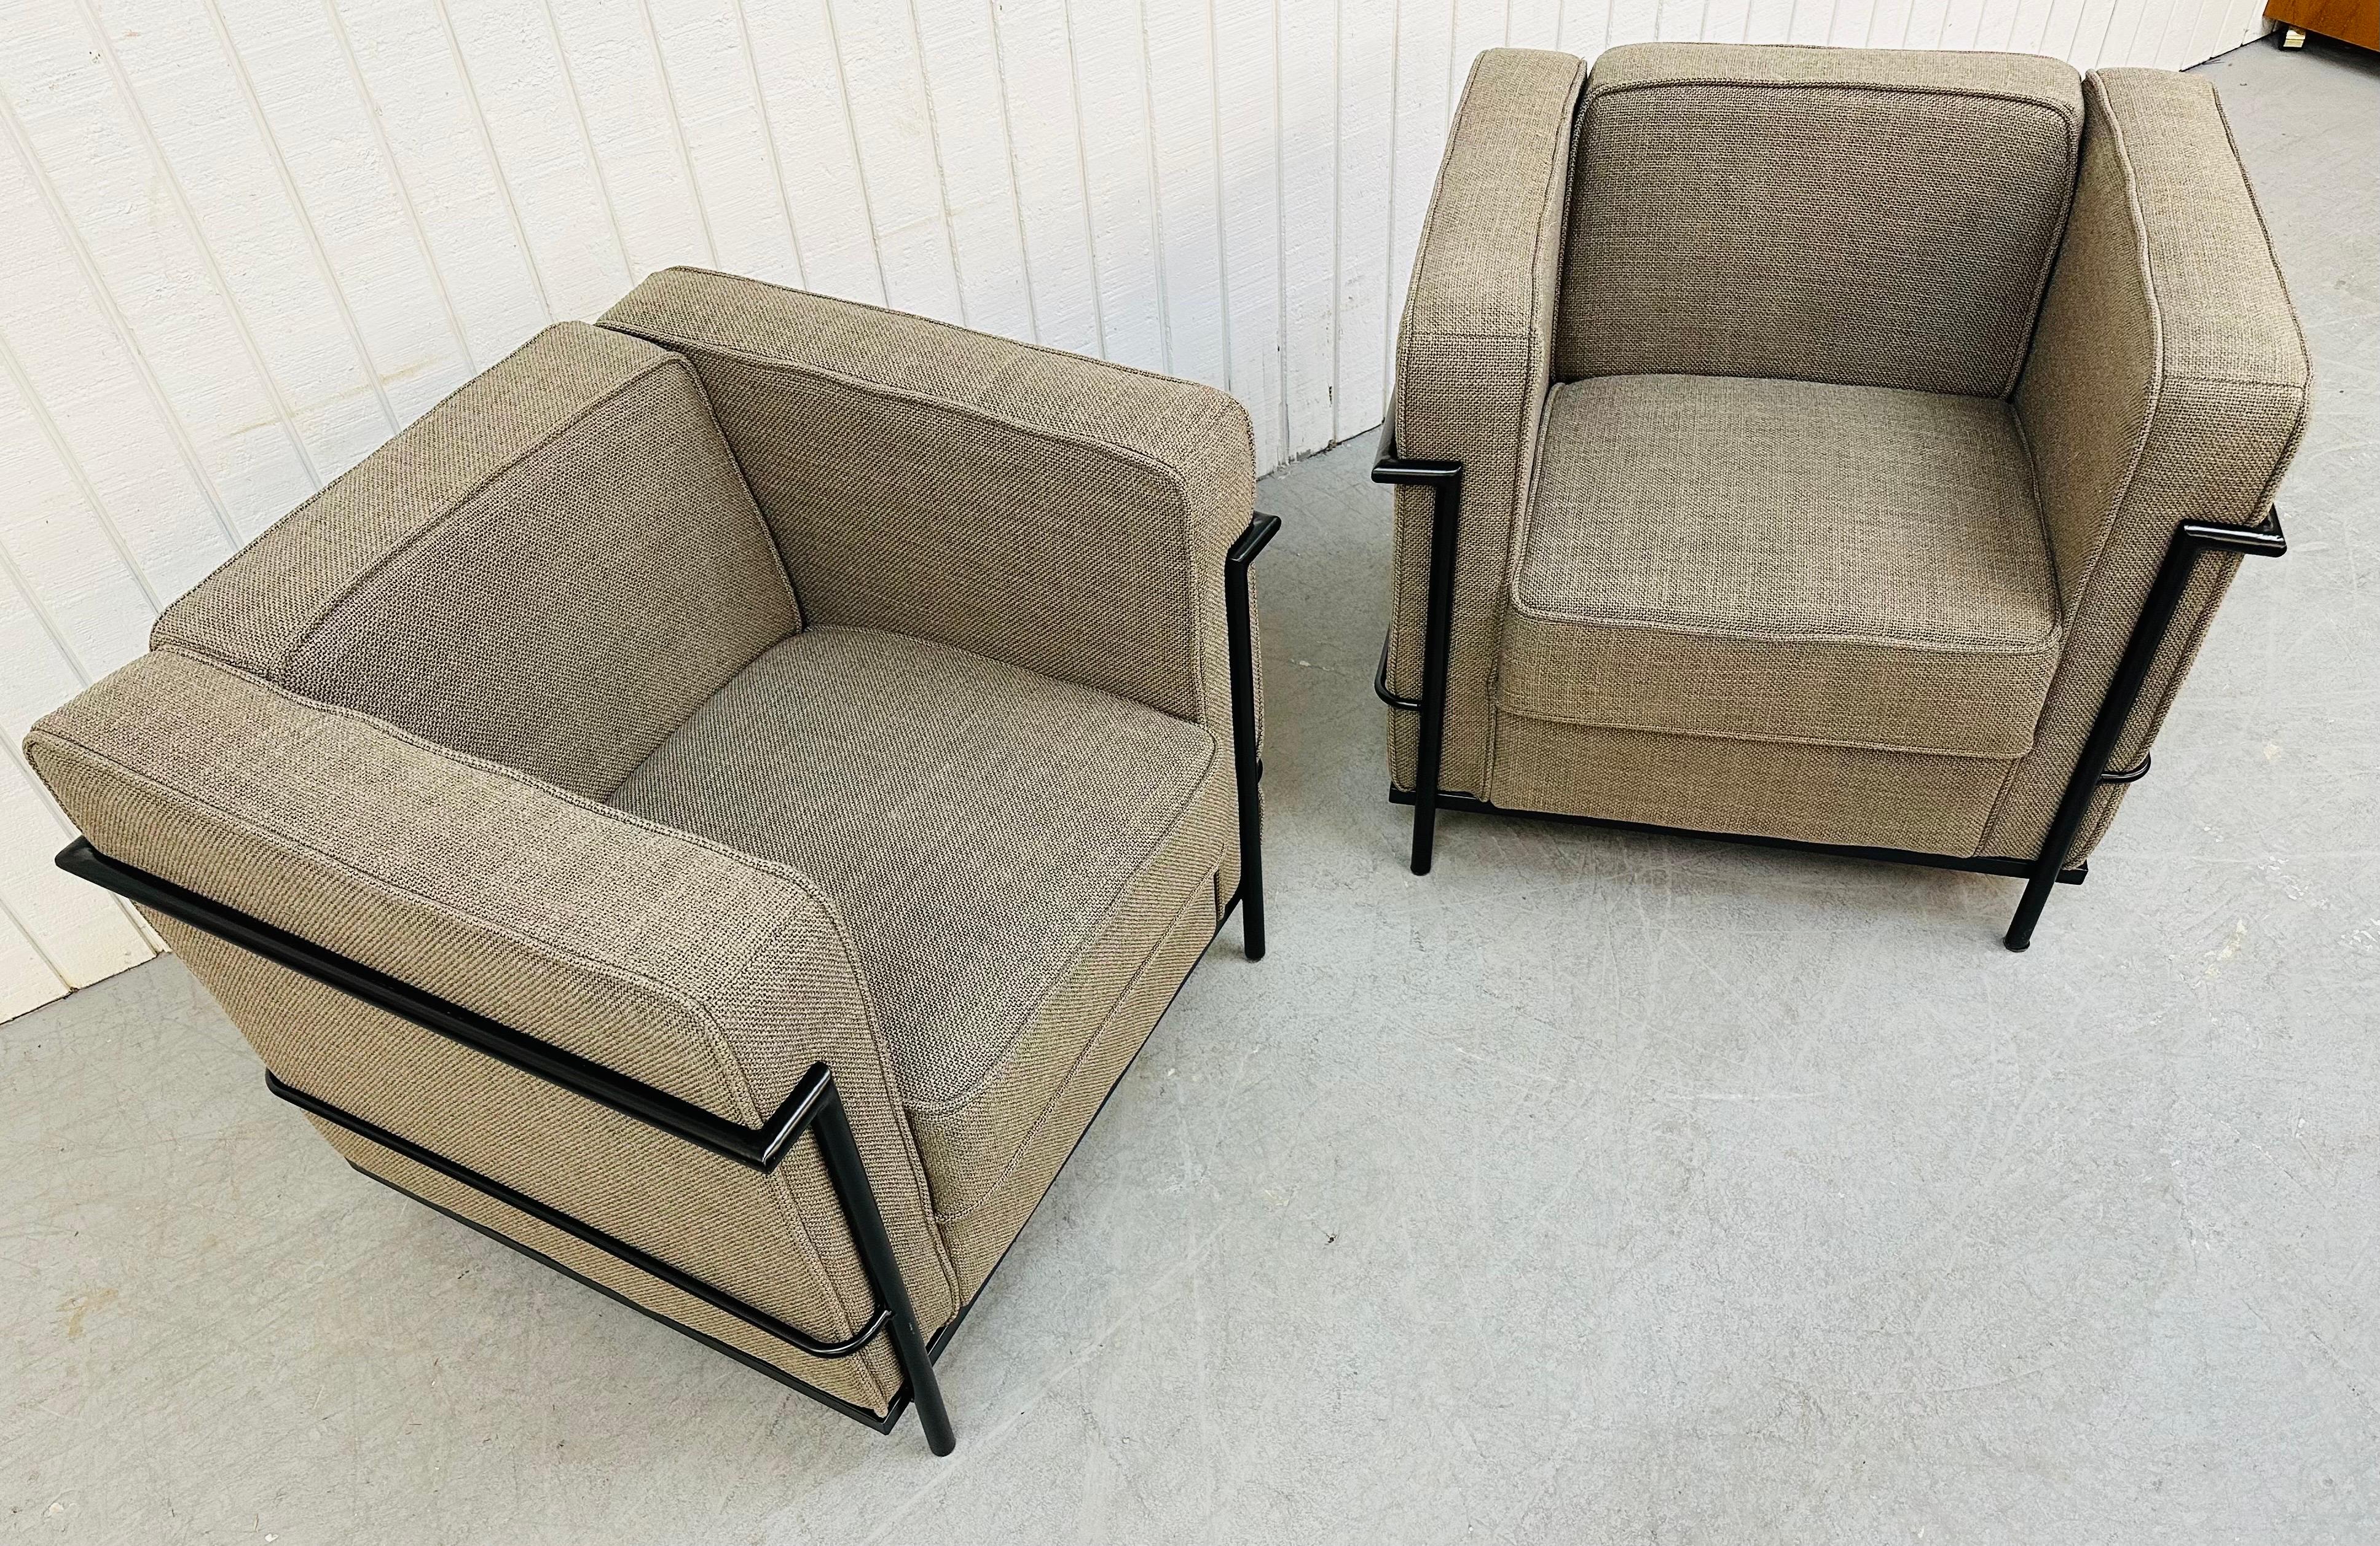 Modern Le Corbusier Style Club Chairs, Set of 2 In Excellent Condition For Sale In Clarksboro, NJ